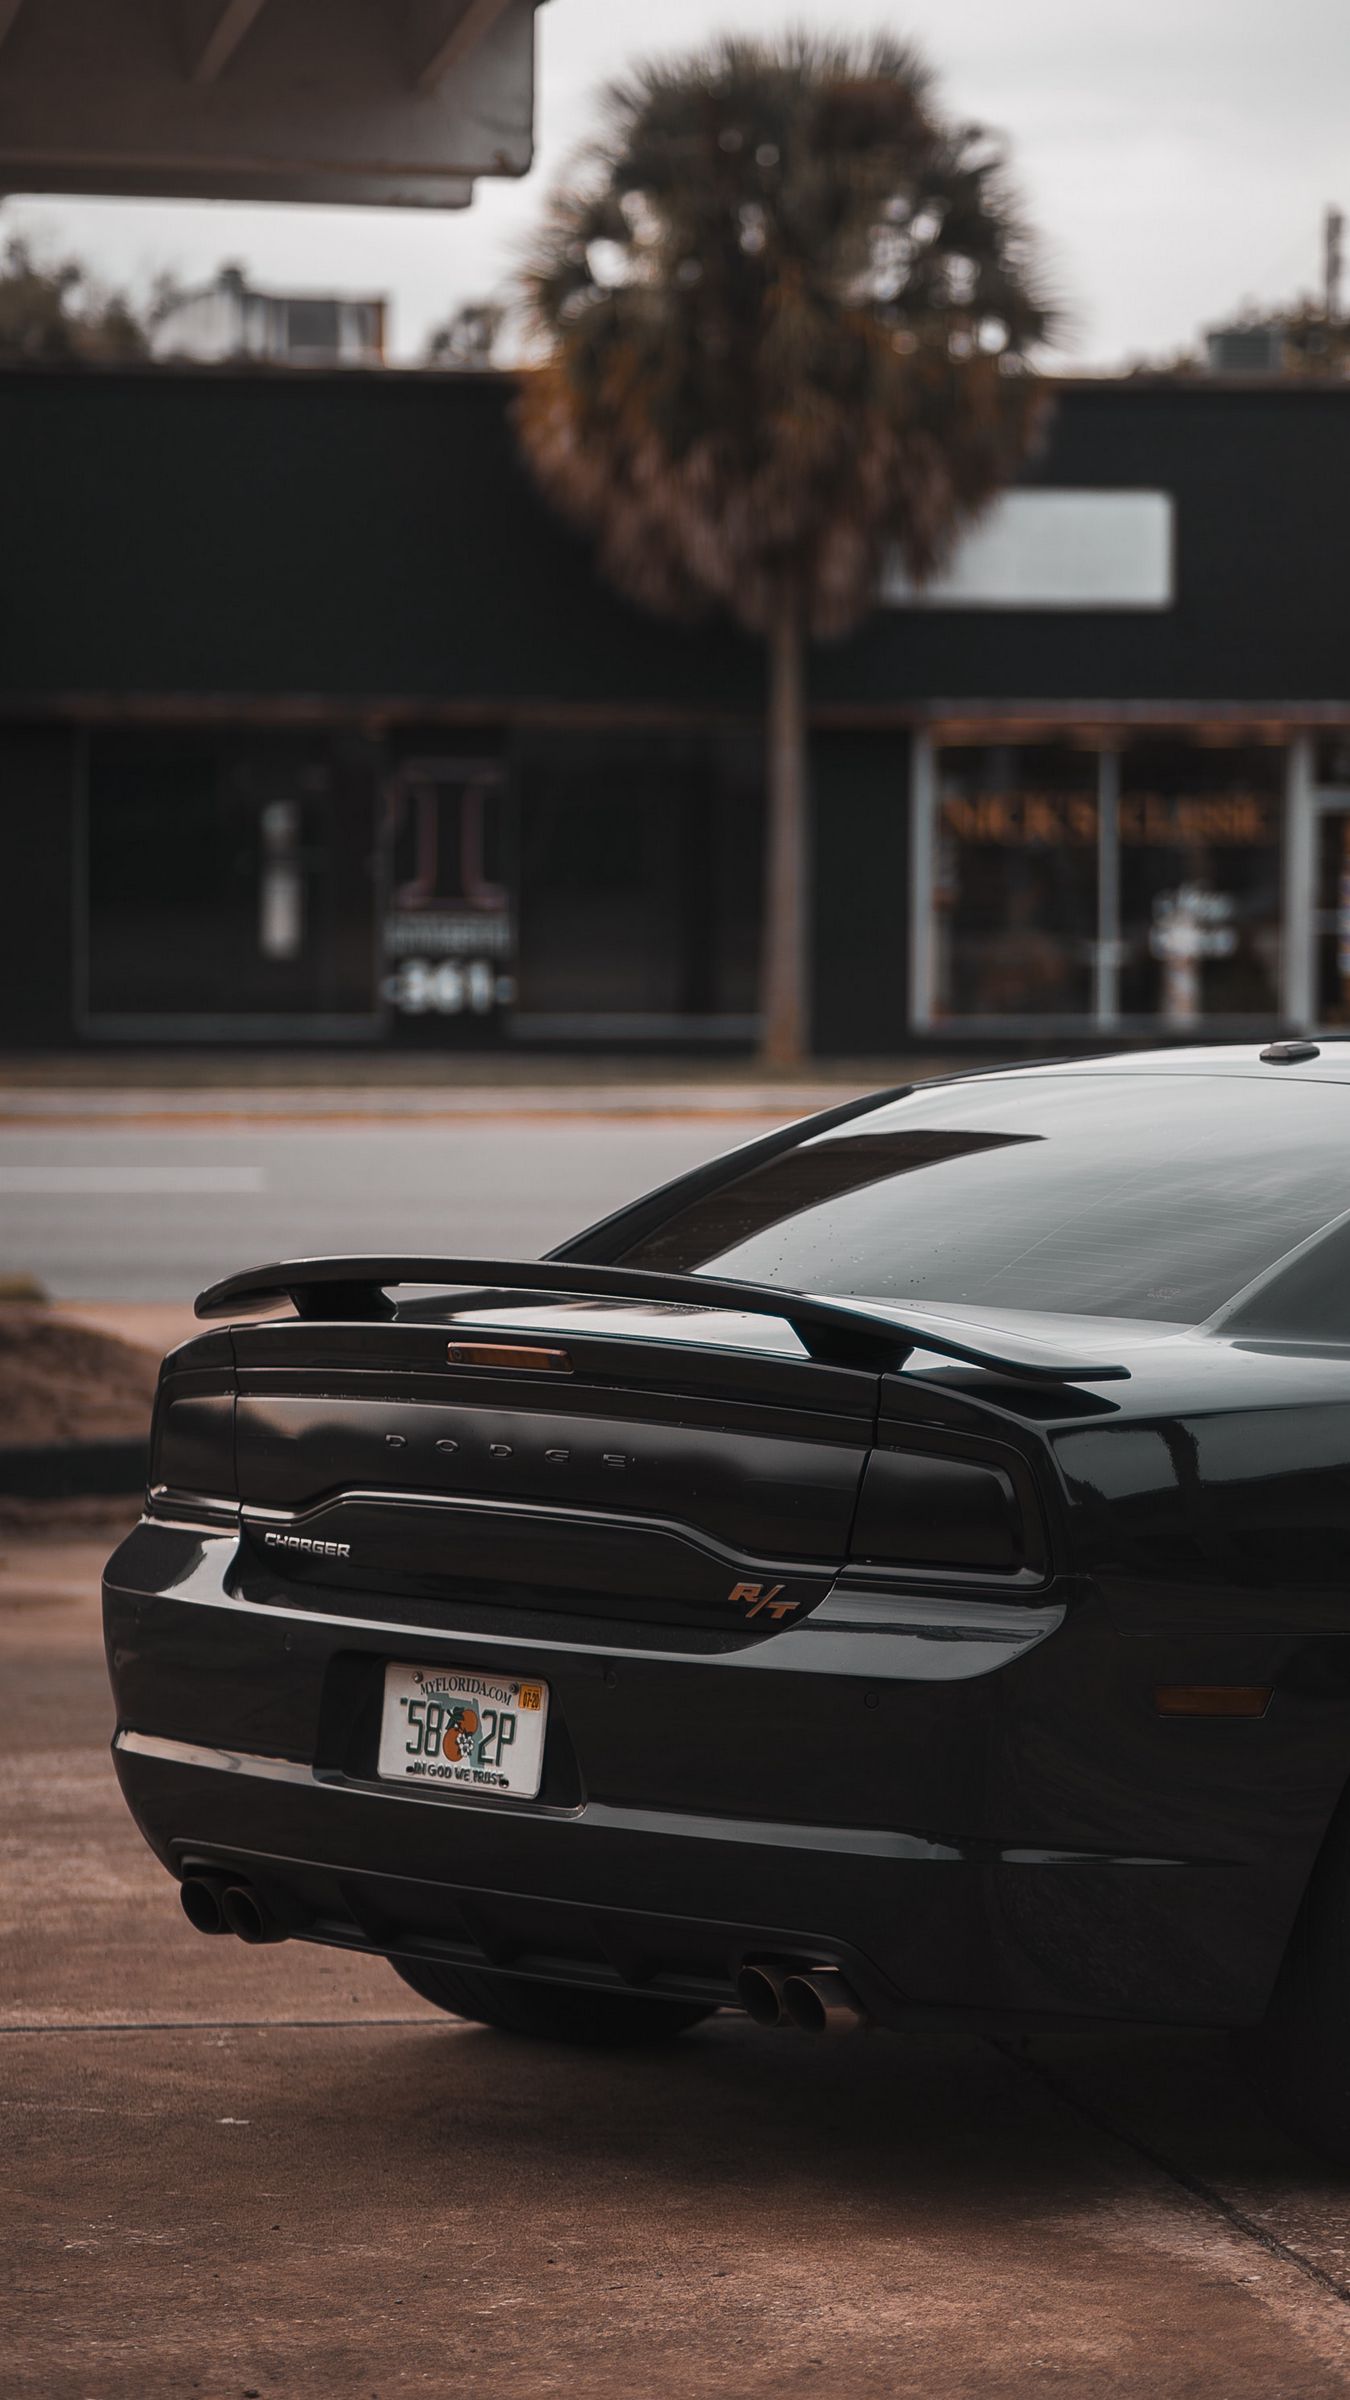 180 Gorgeous Cars iPhone Wallpapers  Dodge charger hellcat Dodge charger Dodge  charger srt